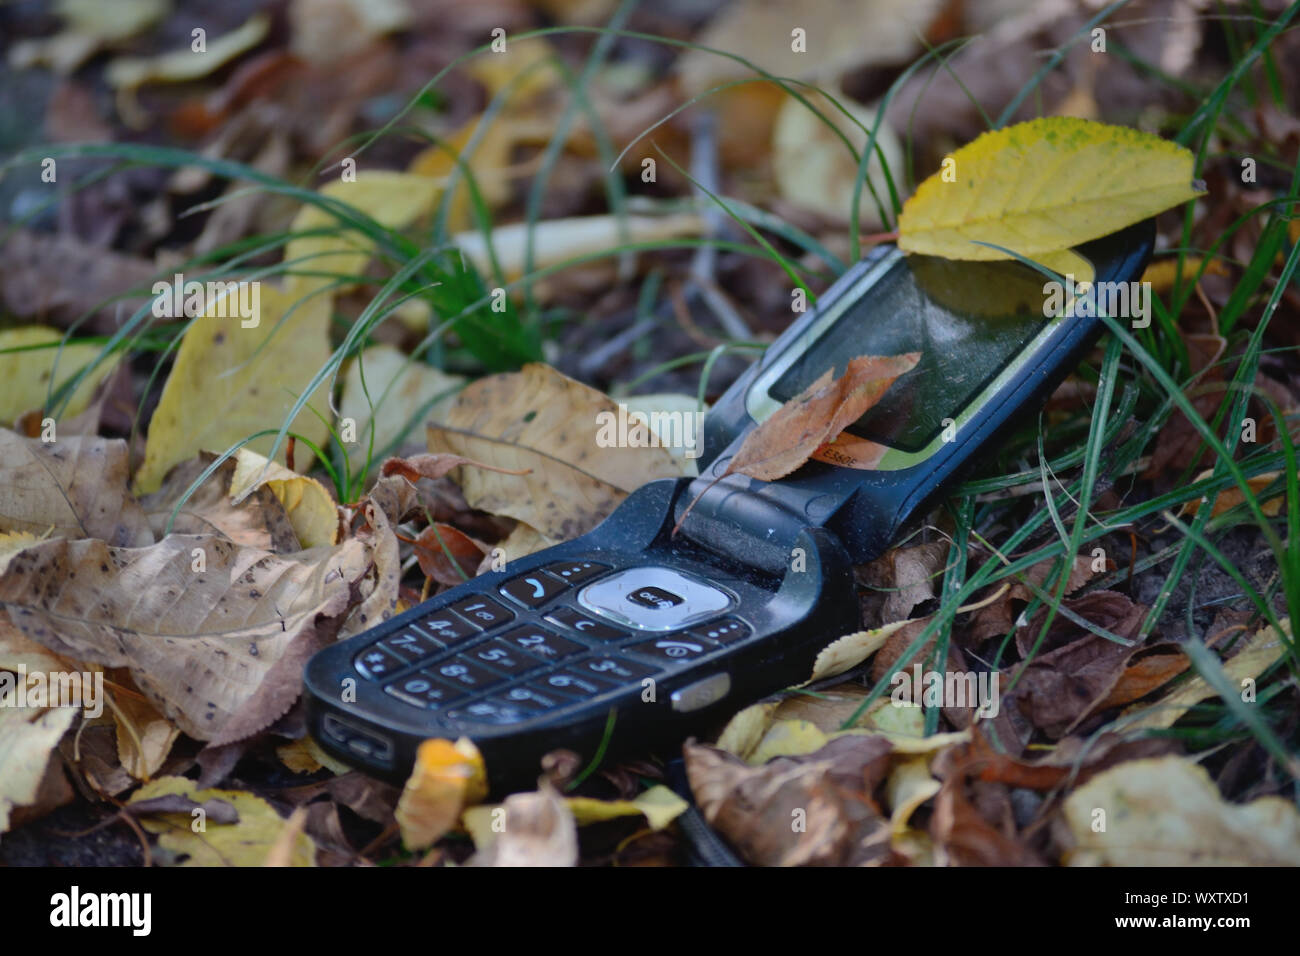 Old Black Cell Flip Phone On The Ground Samsung Sgh 60e Stock Photo Alamy